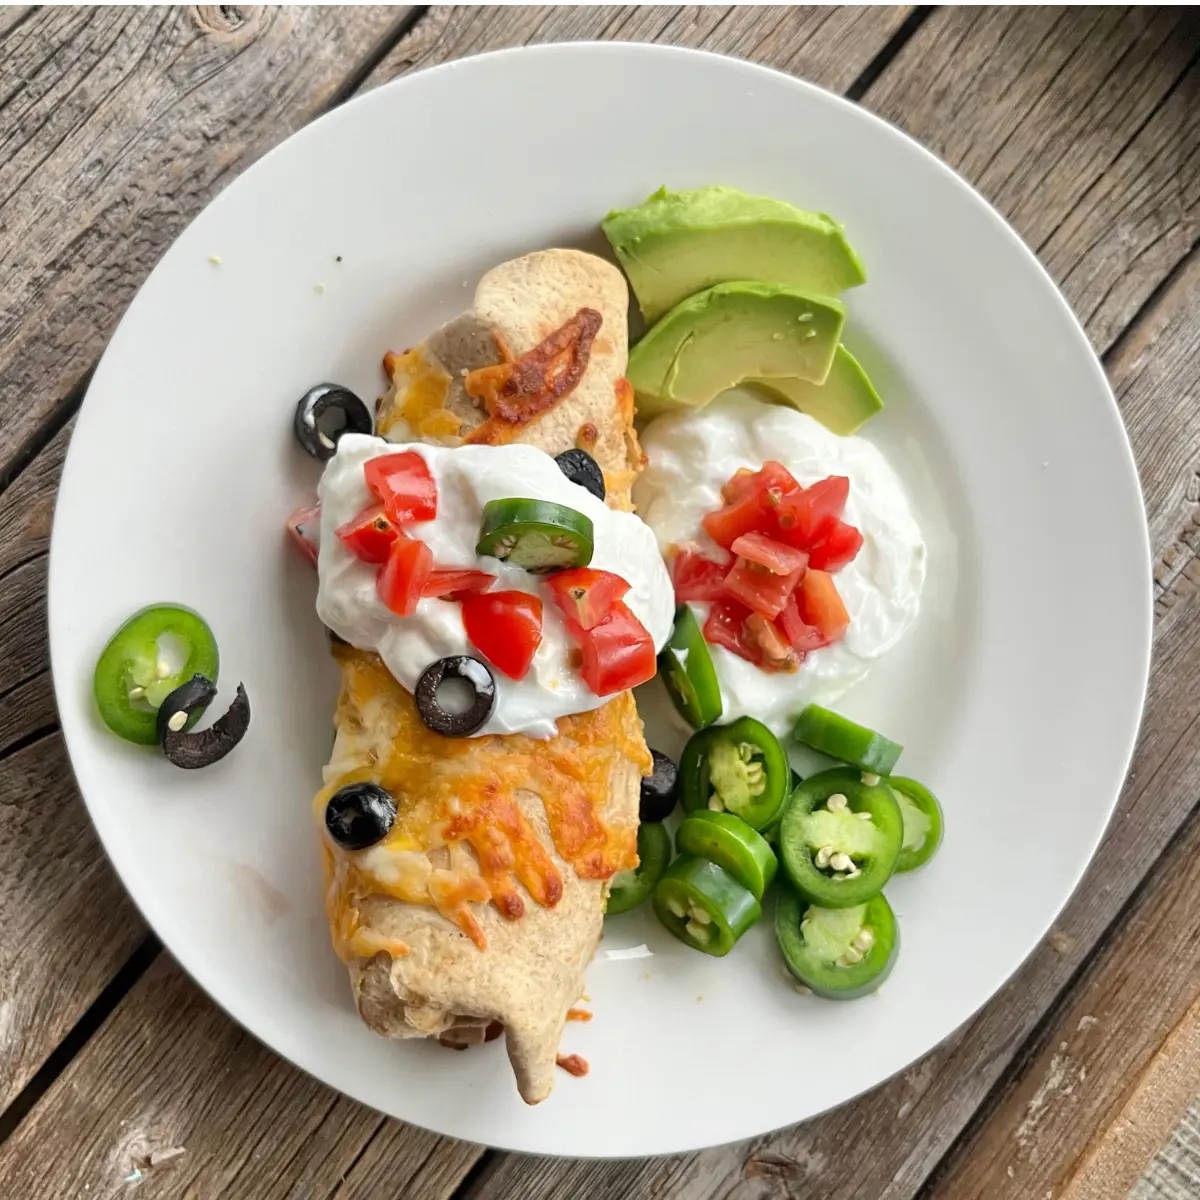 A high protein breakfast burrito with a crispy cheese crust on a white plate topped with Greek yogurt, sliced avocado, and diced tomatoes.